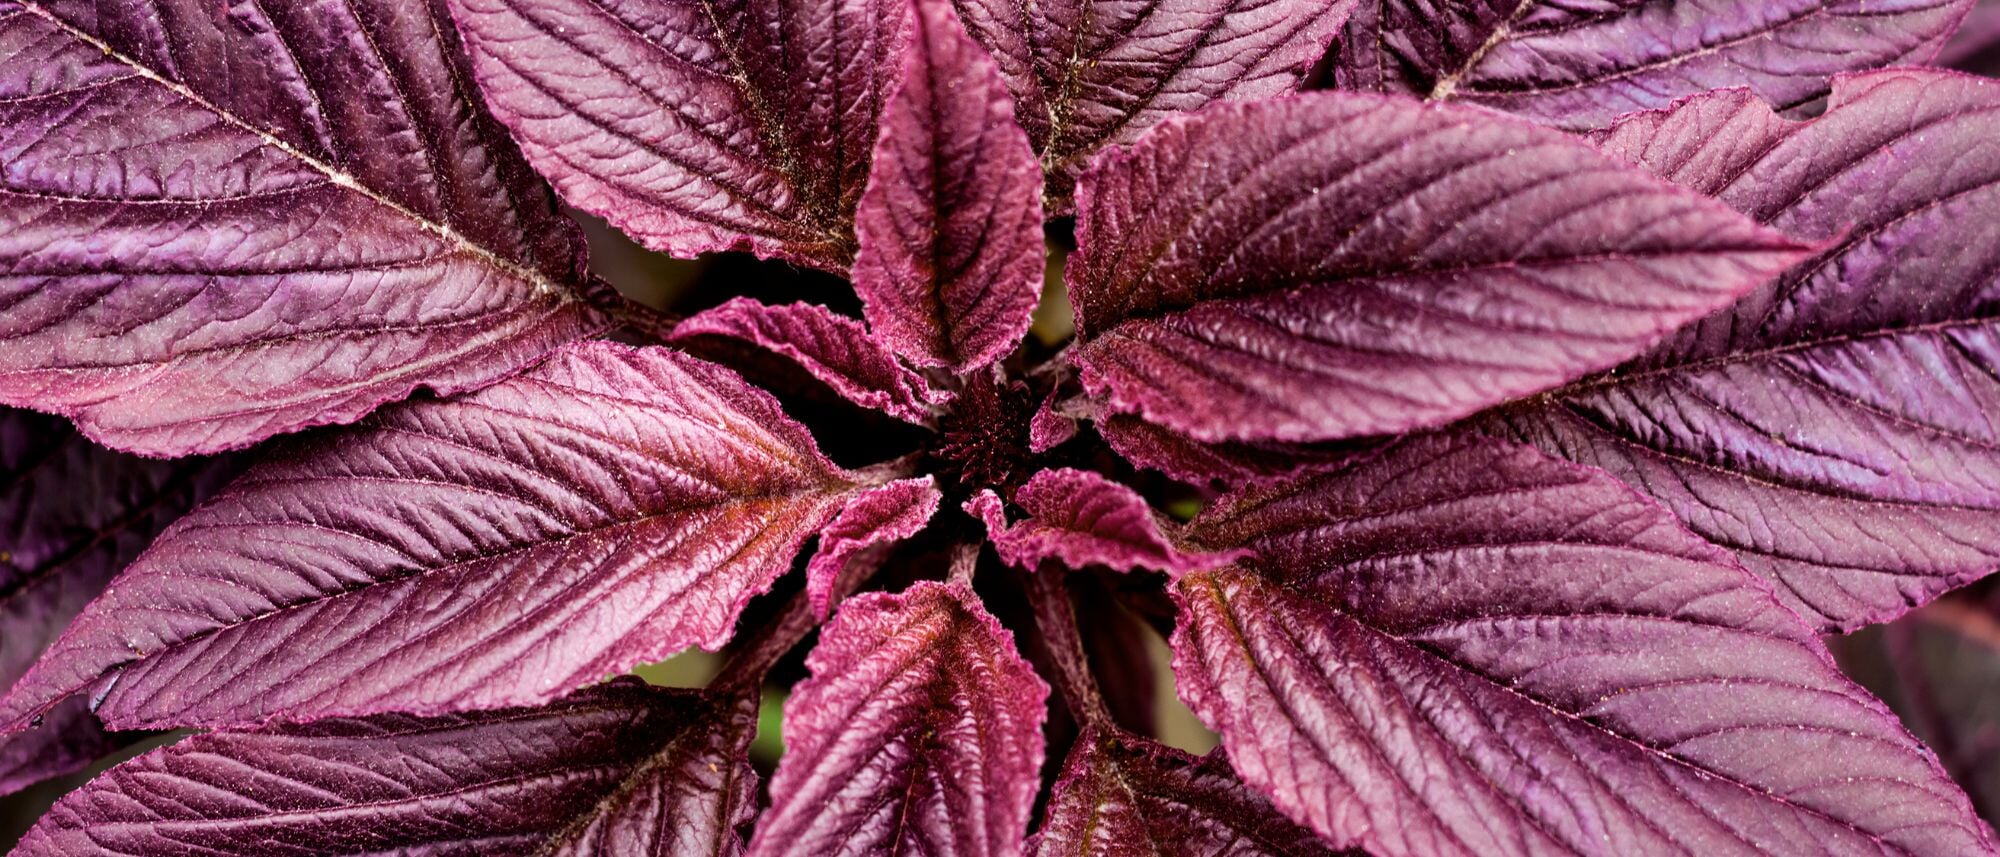 grow bright red amaranth for bouquets or harvest the grain